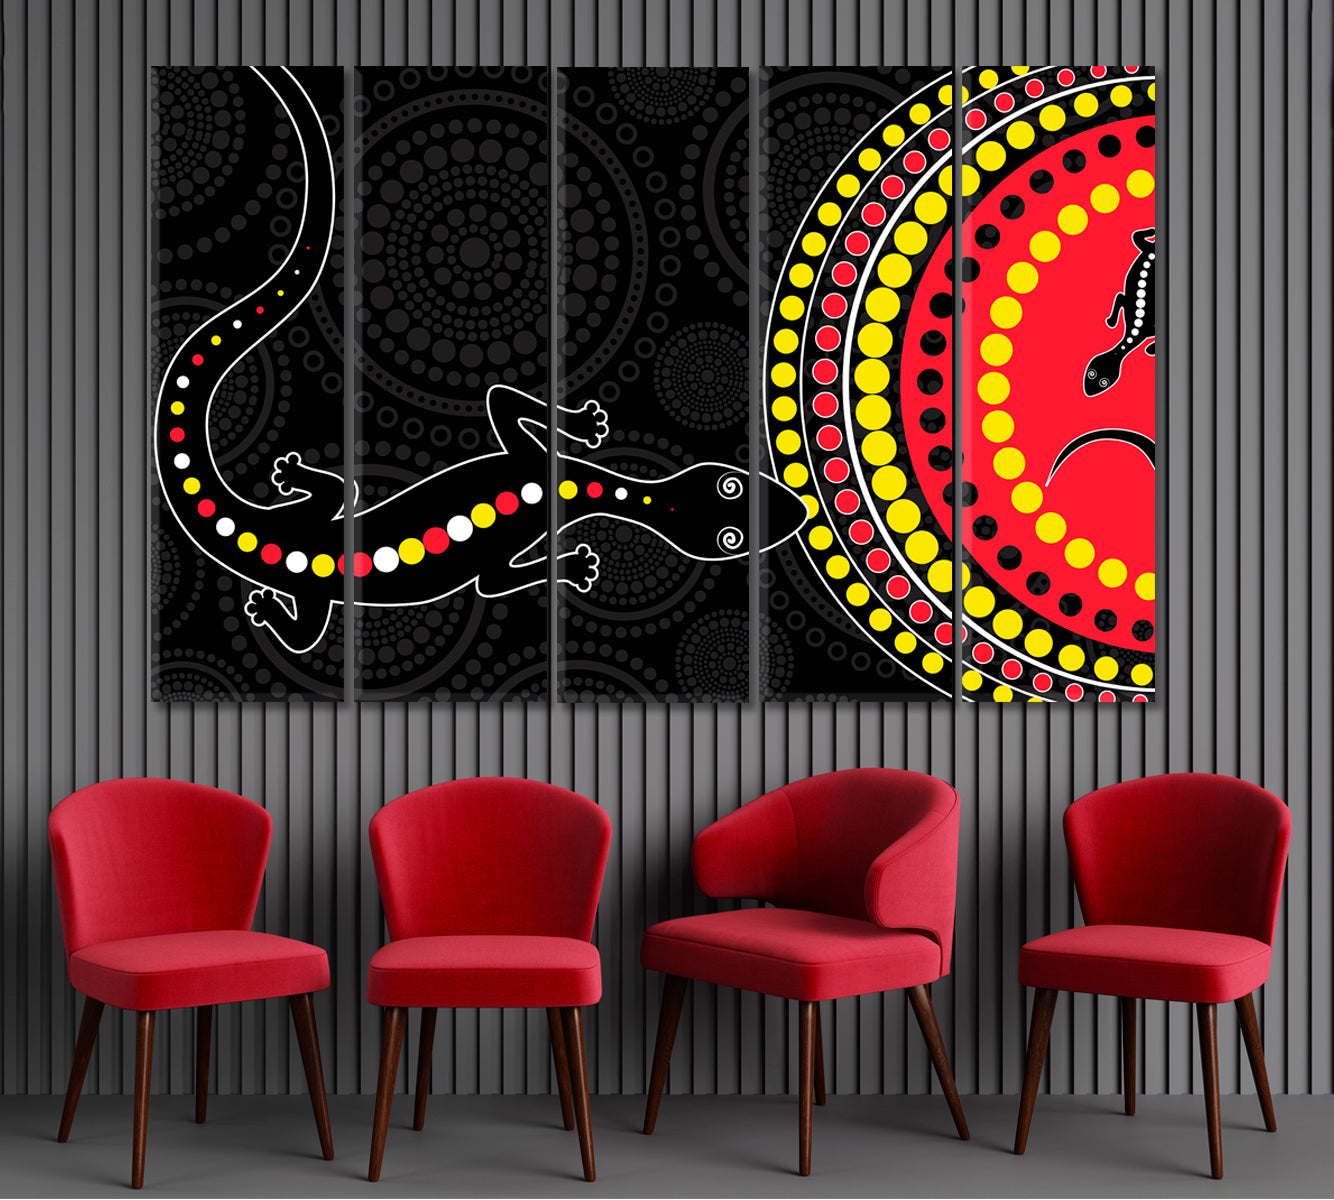 BLACK AND RED Lizard Abstract African Style Pattern Vivid Art Abstract Art Print Artesty 5 panels 36" x 24" 